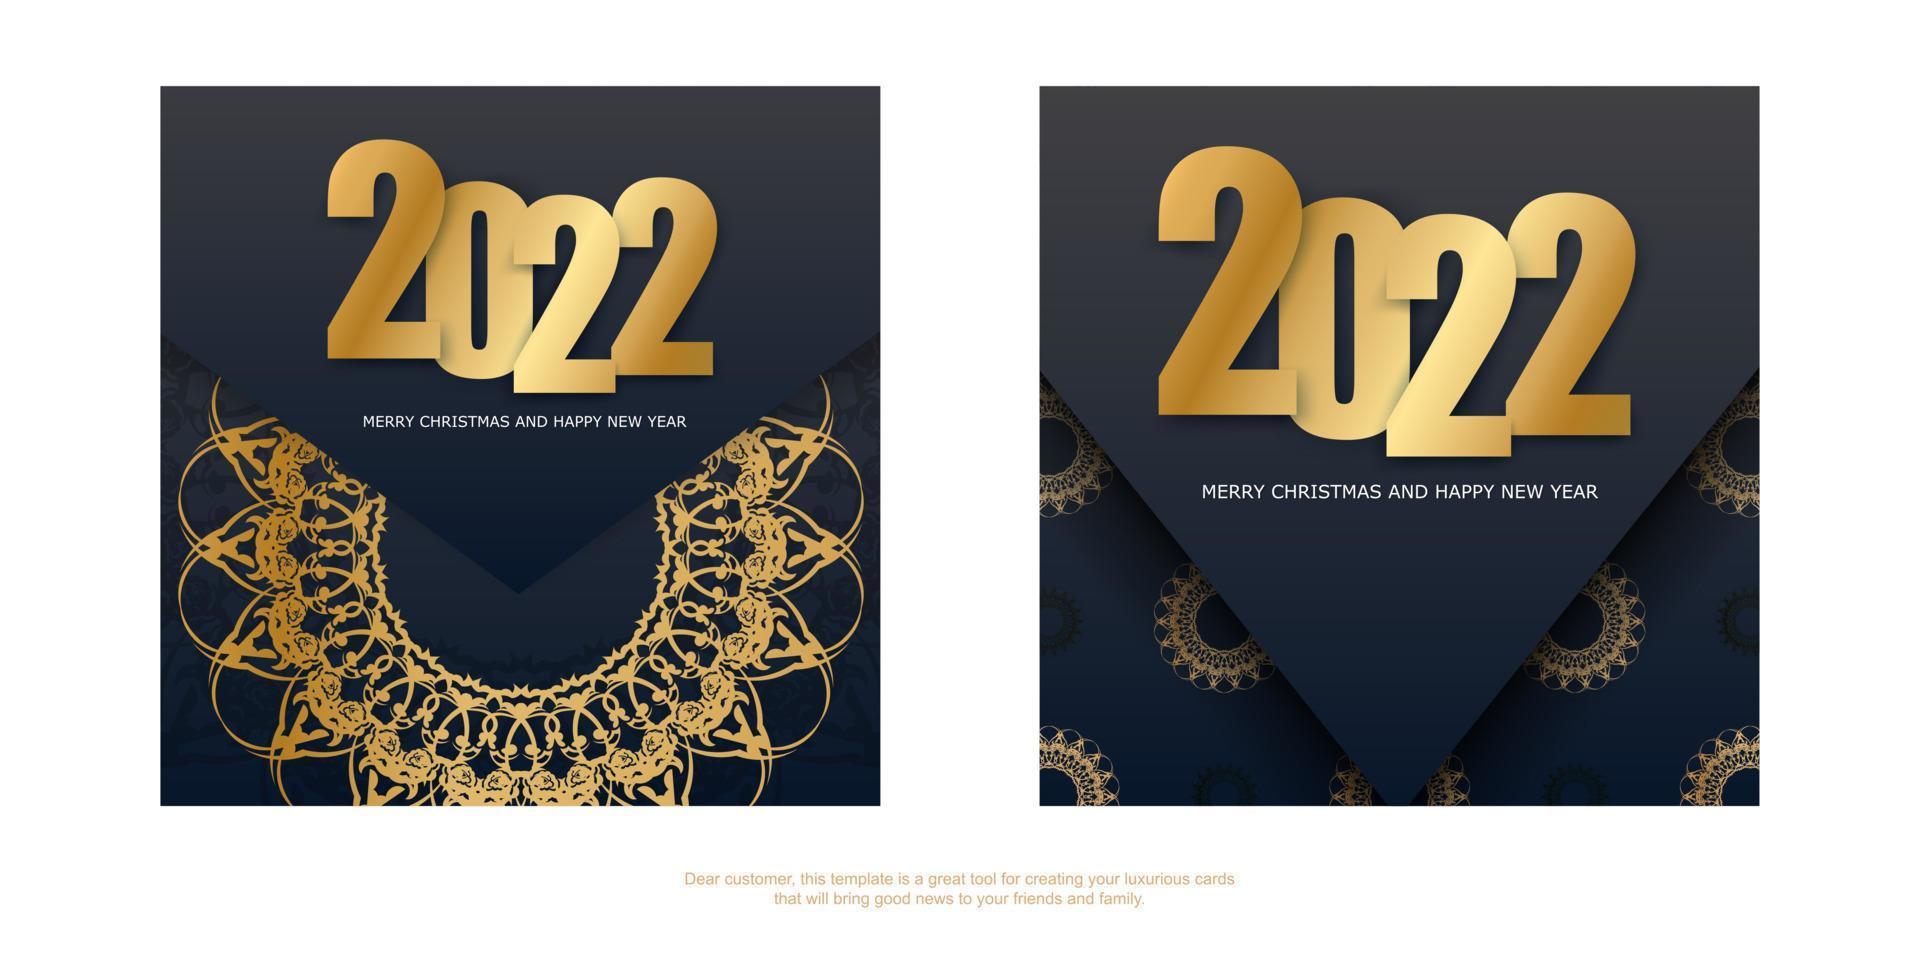 2022 brochure merry christmas and happy new year black color with vintage gold ornament vector